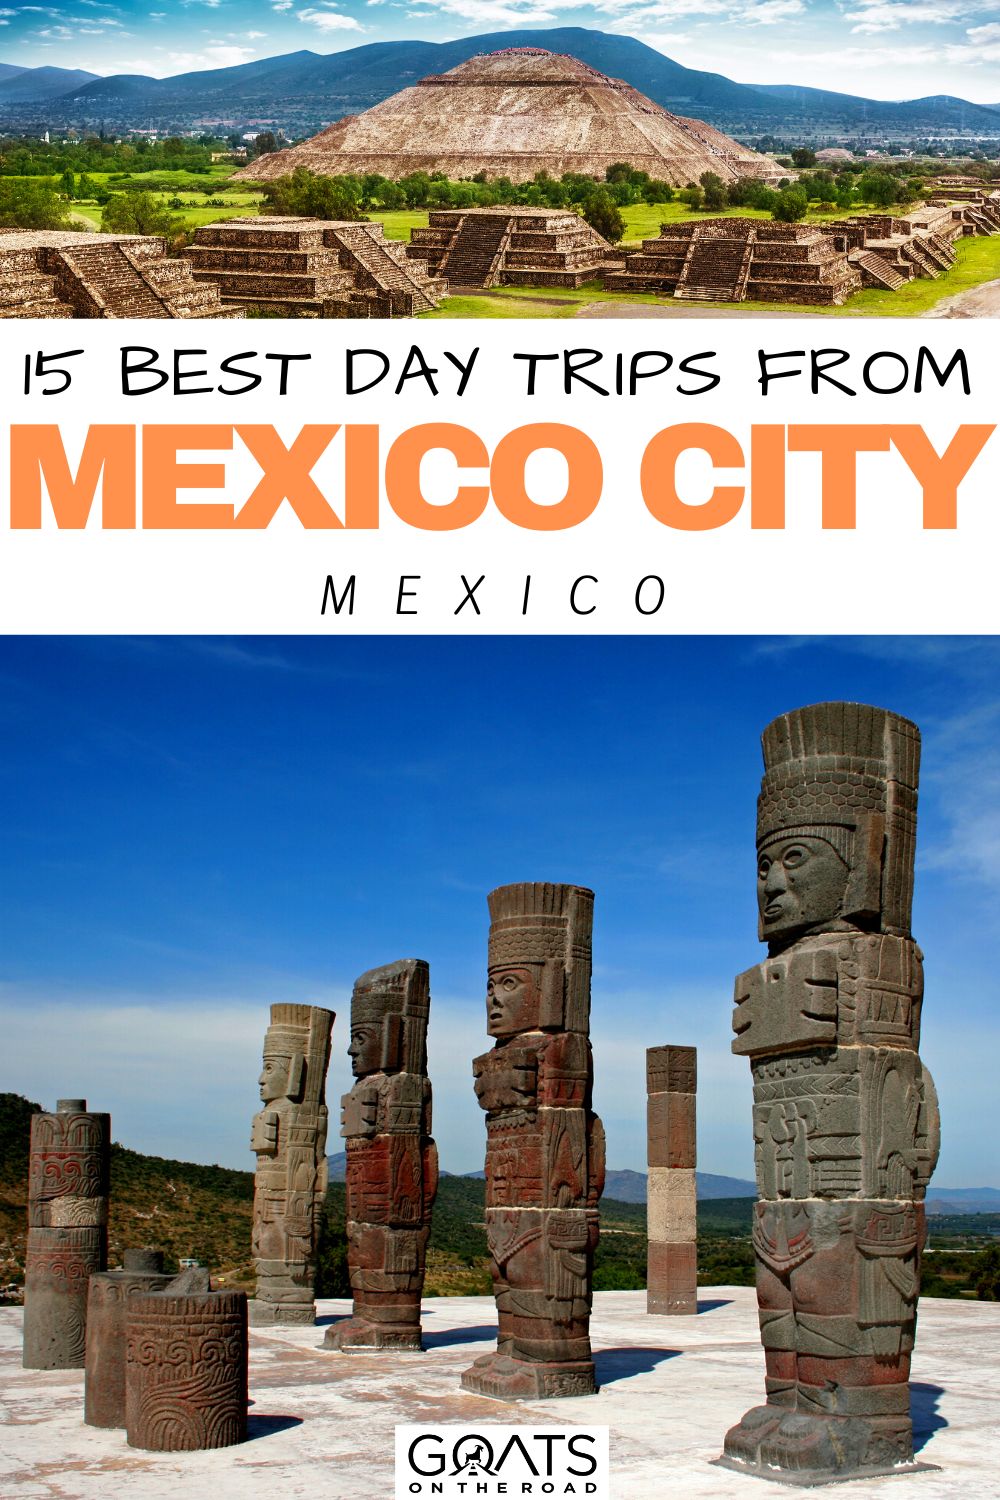 “15 Best Day Trips From Mexico City, Mexico